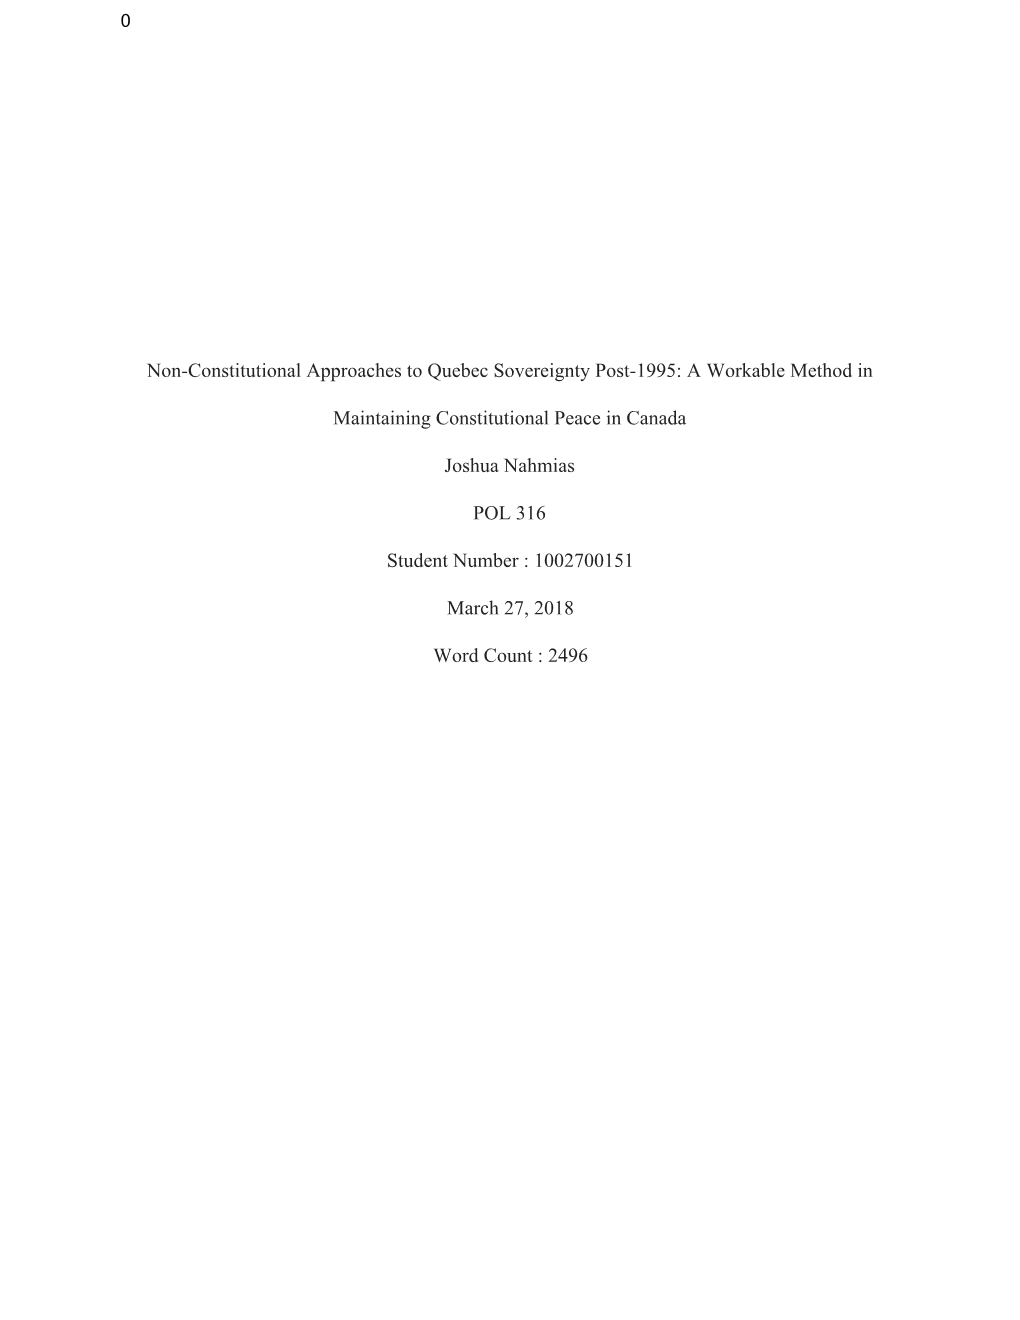 Non-Constitutional Approaches to Quebec Sovereignty Post-1995: a Workable Method In